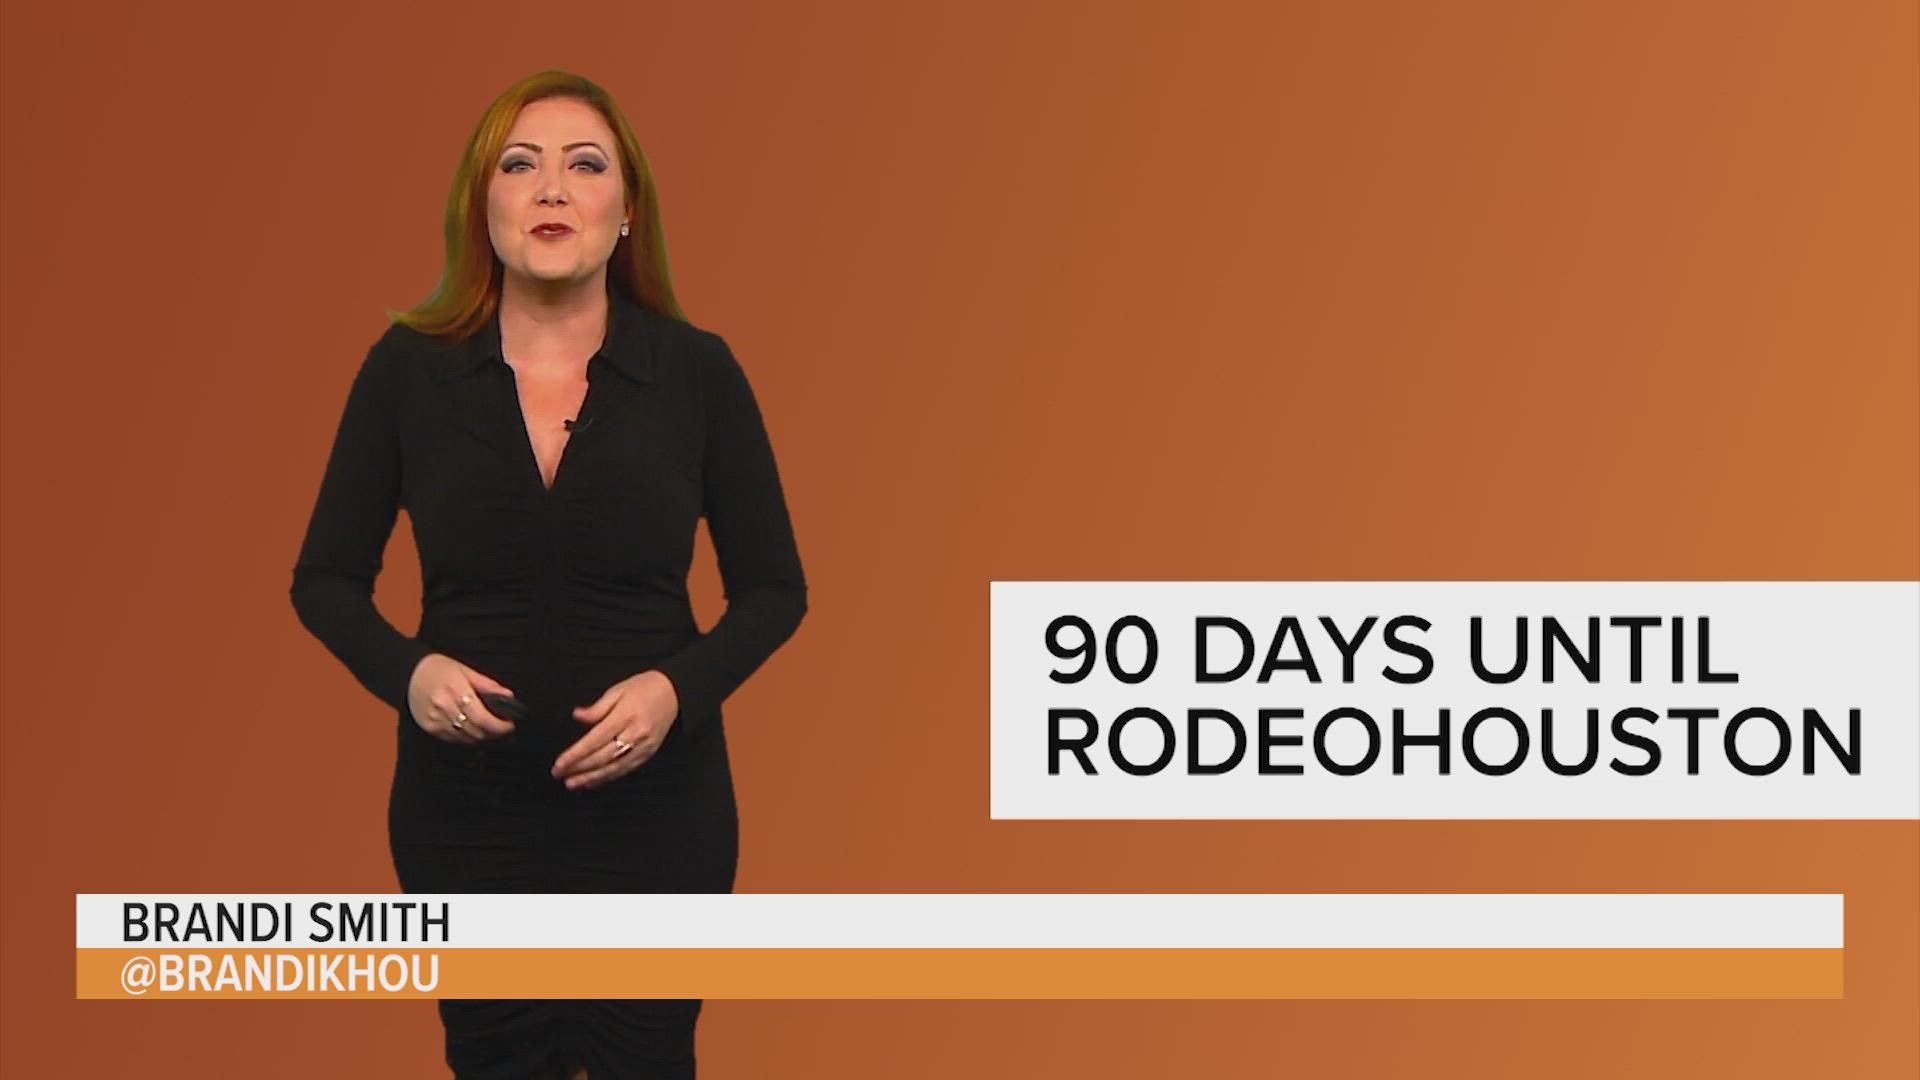 Digital anchor Brandi Smith debated highlighting 90 reasons to rodeo, but stuck with nine for brevity’s sake.